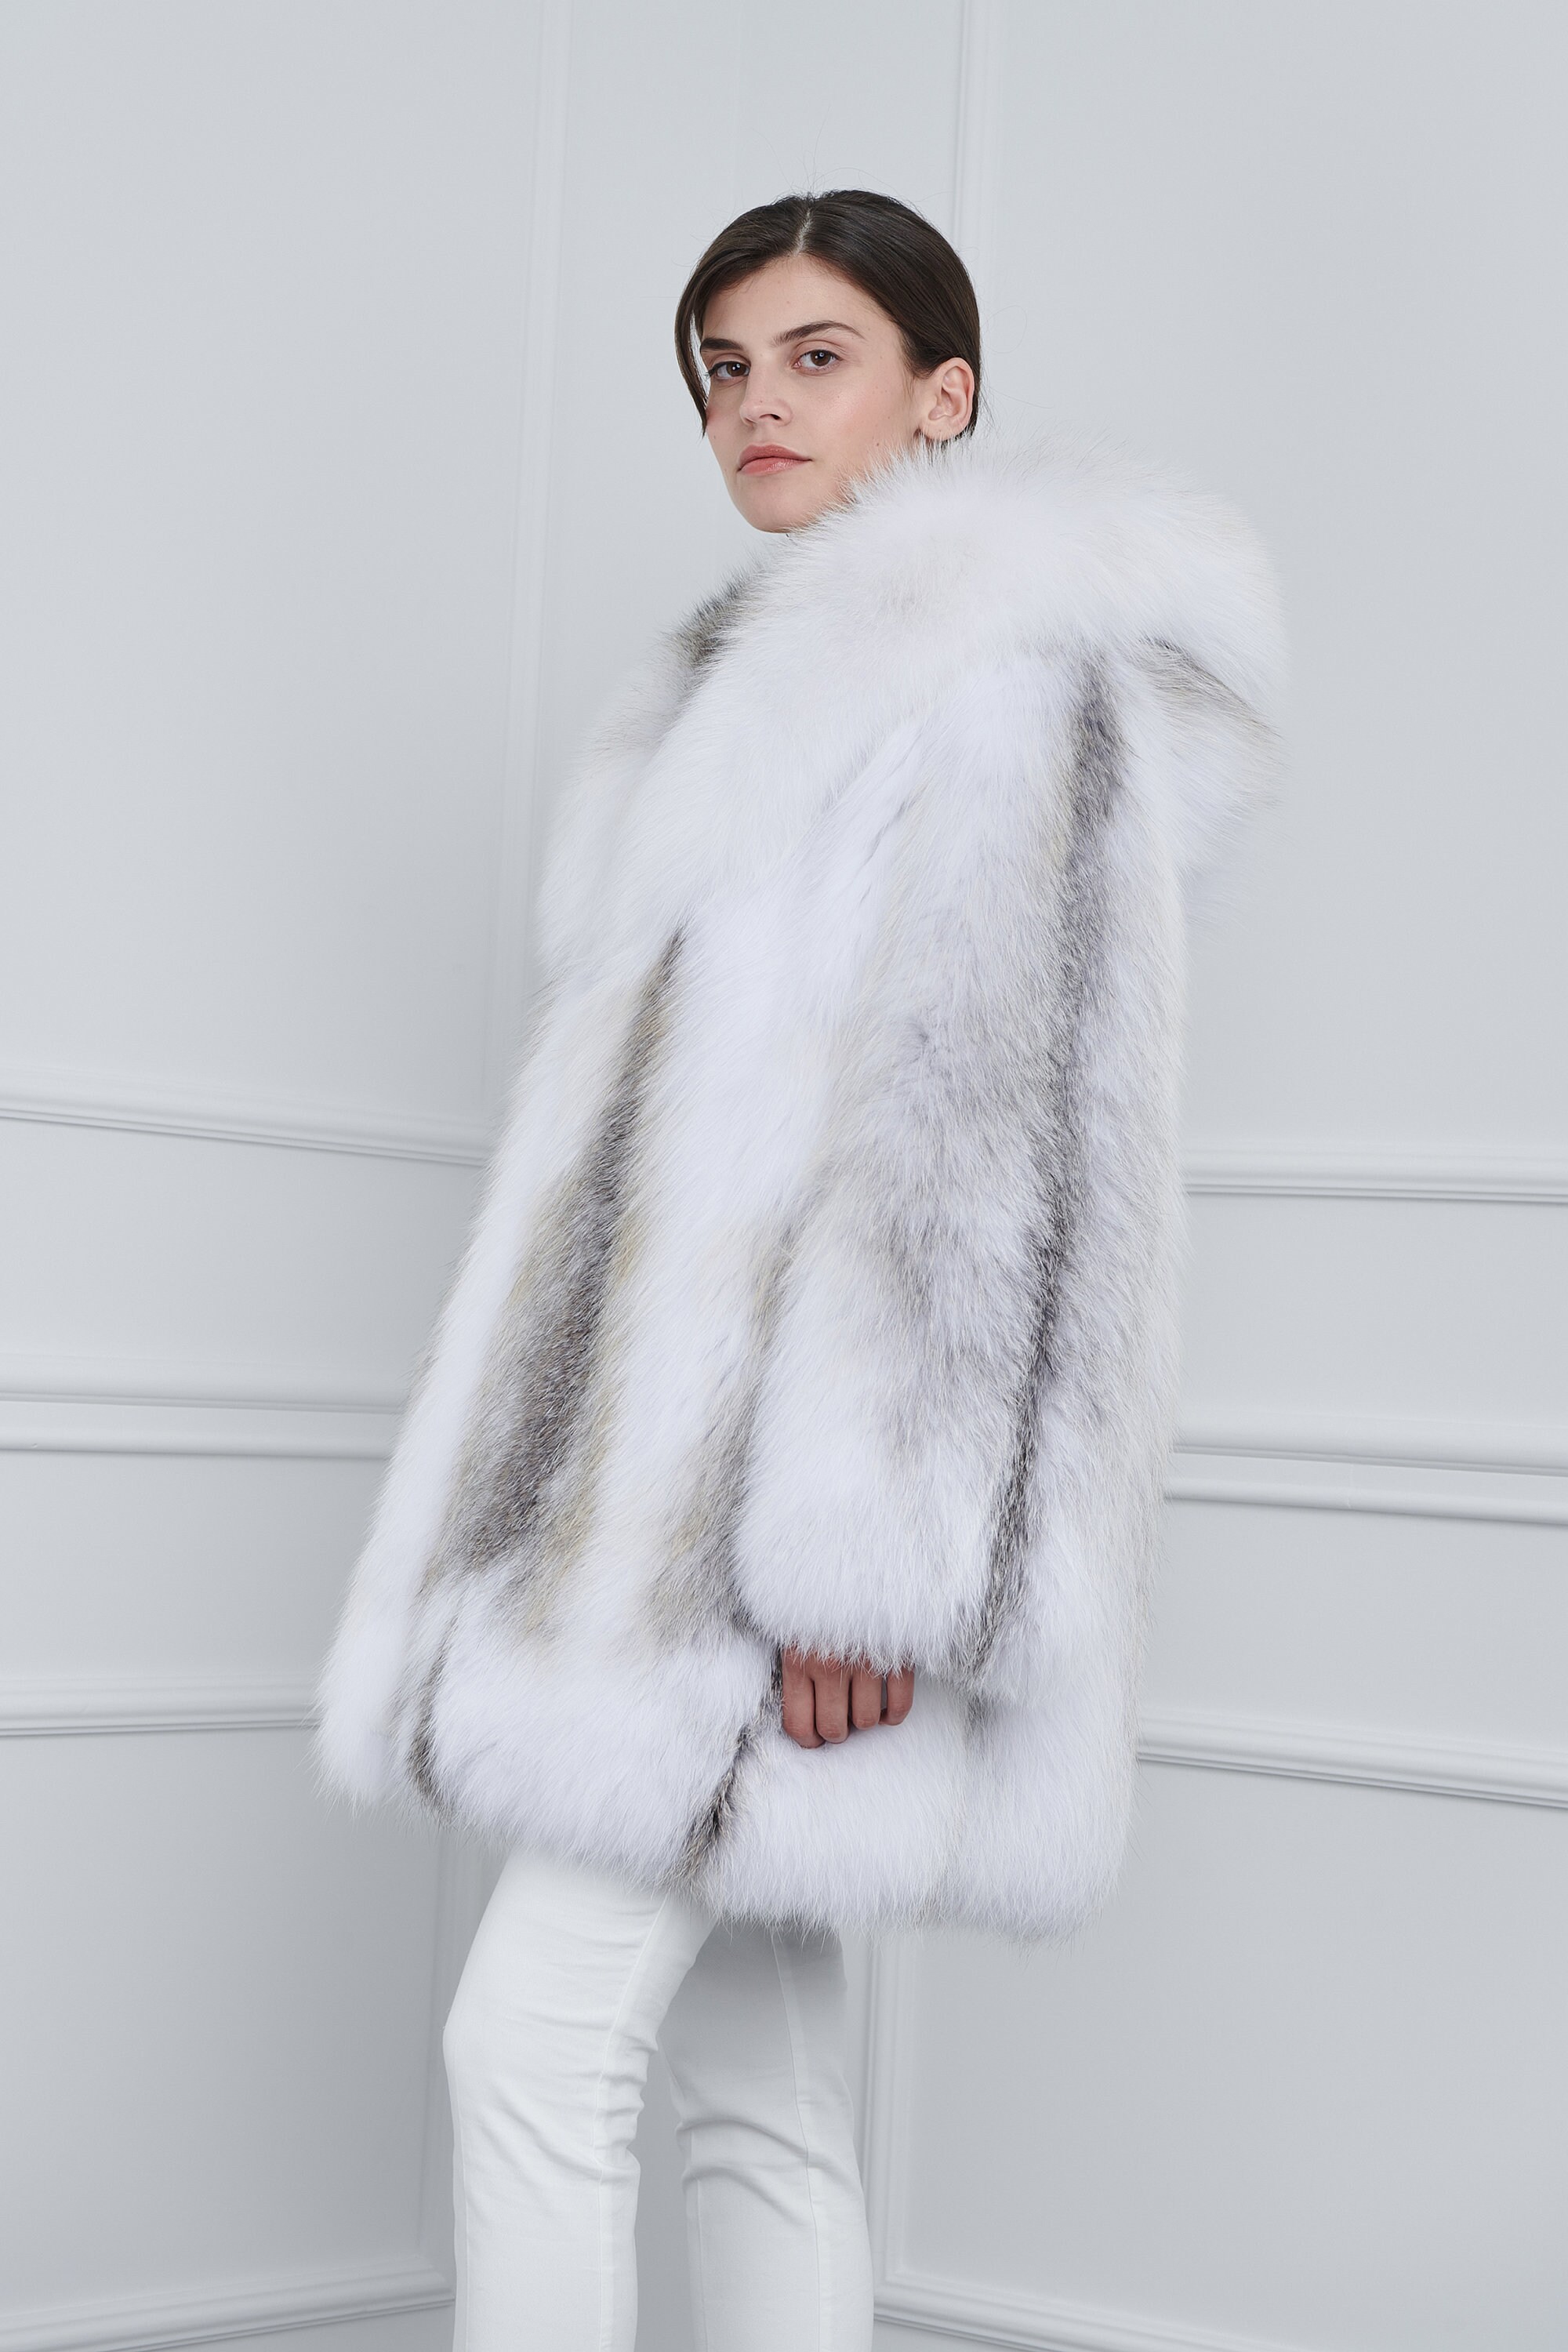 Arctic Gold Fox Fur Jacket With Hood Made of 100% Real Fur. Real Fur ...